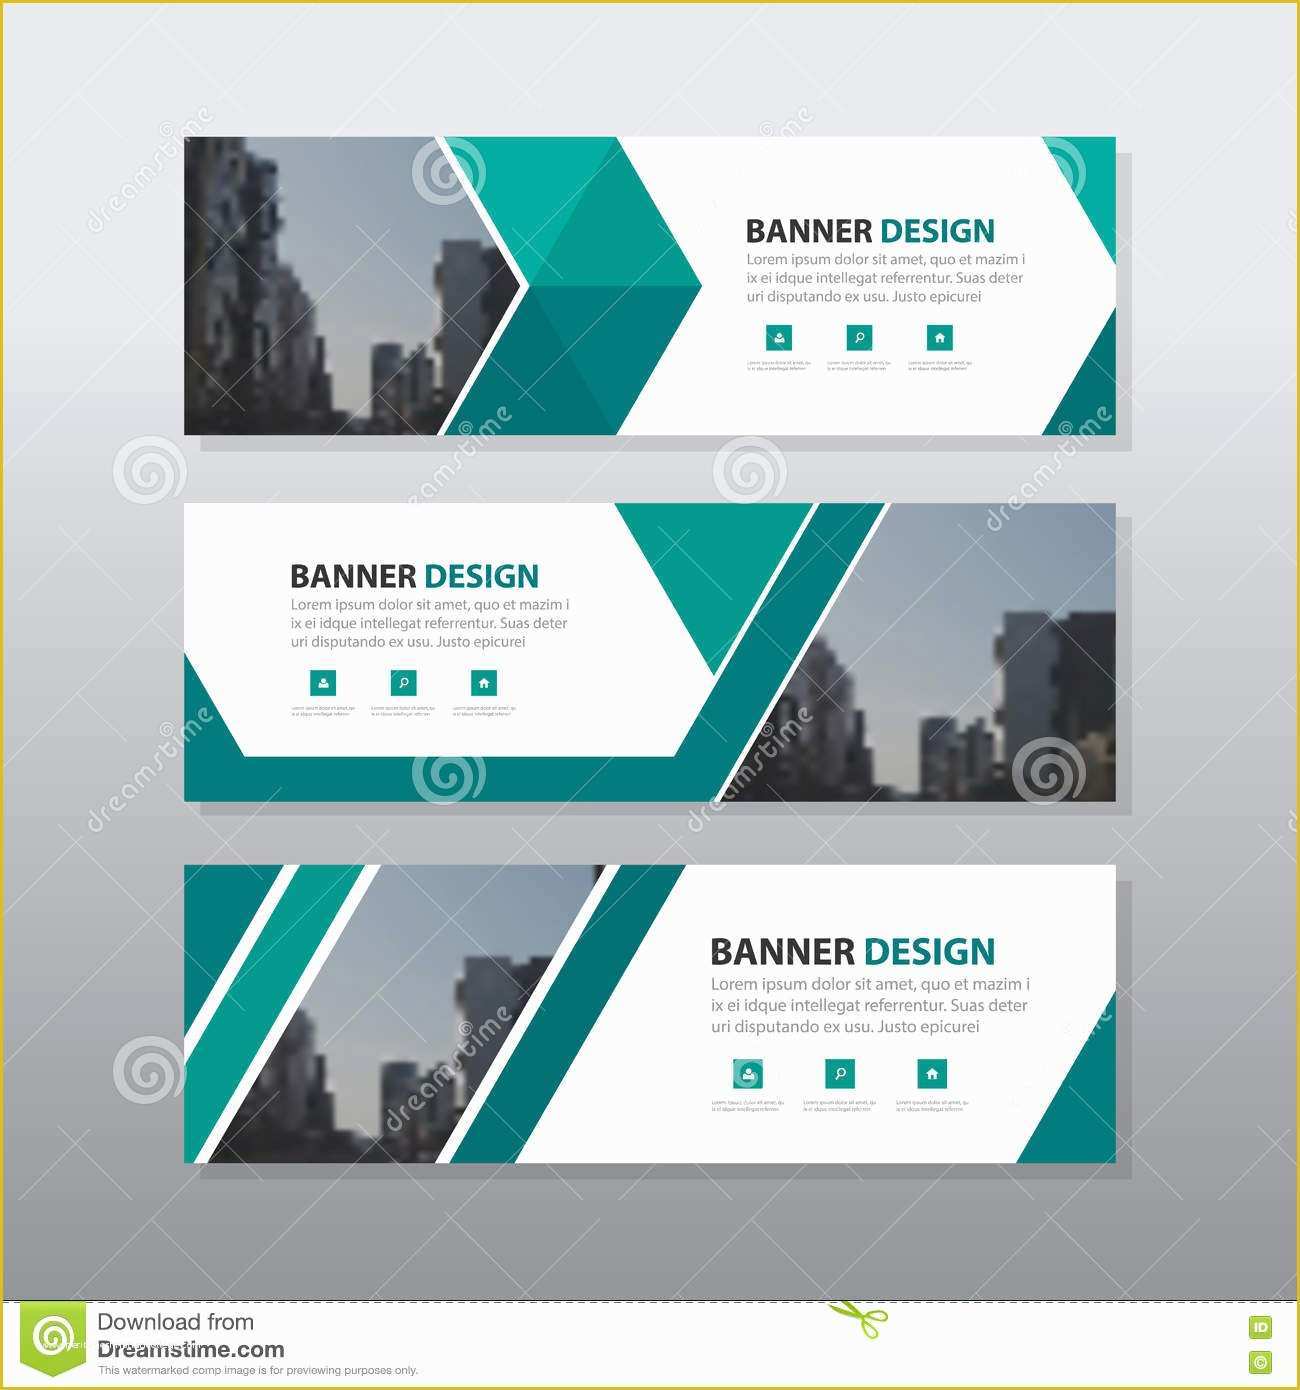 Free Business Advertising Templates Of Corporate Header Design All Free Headers